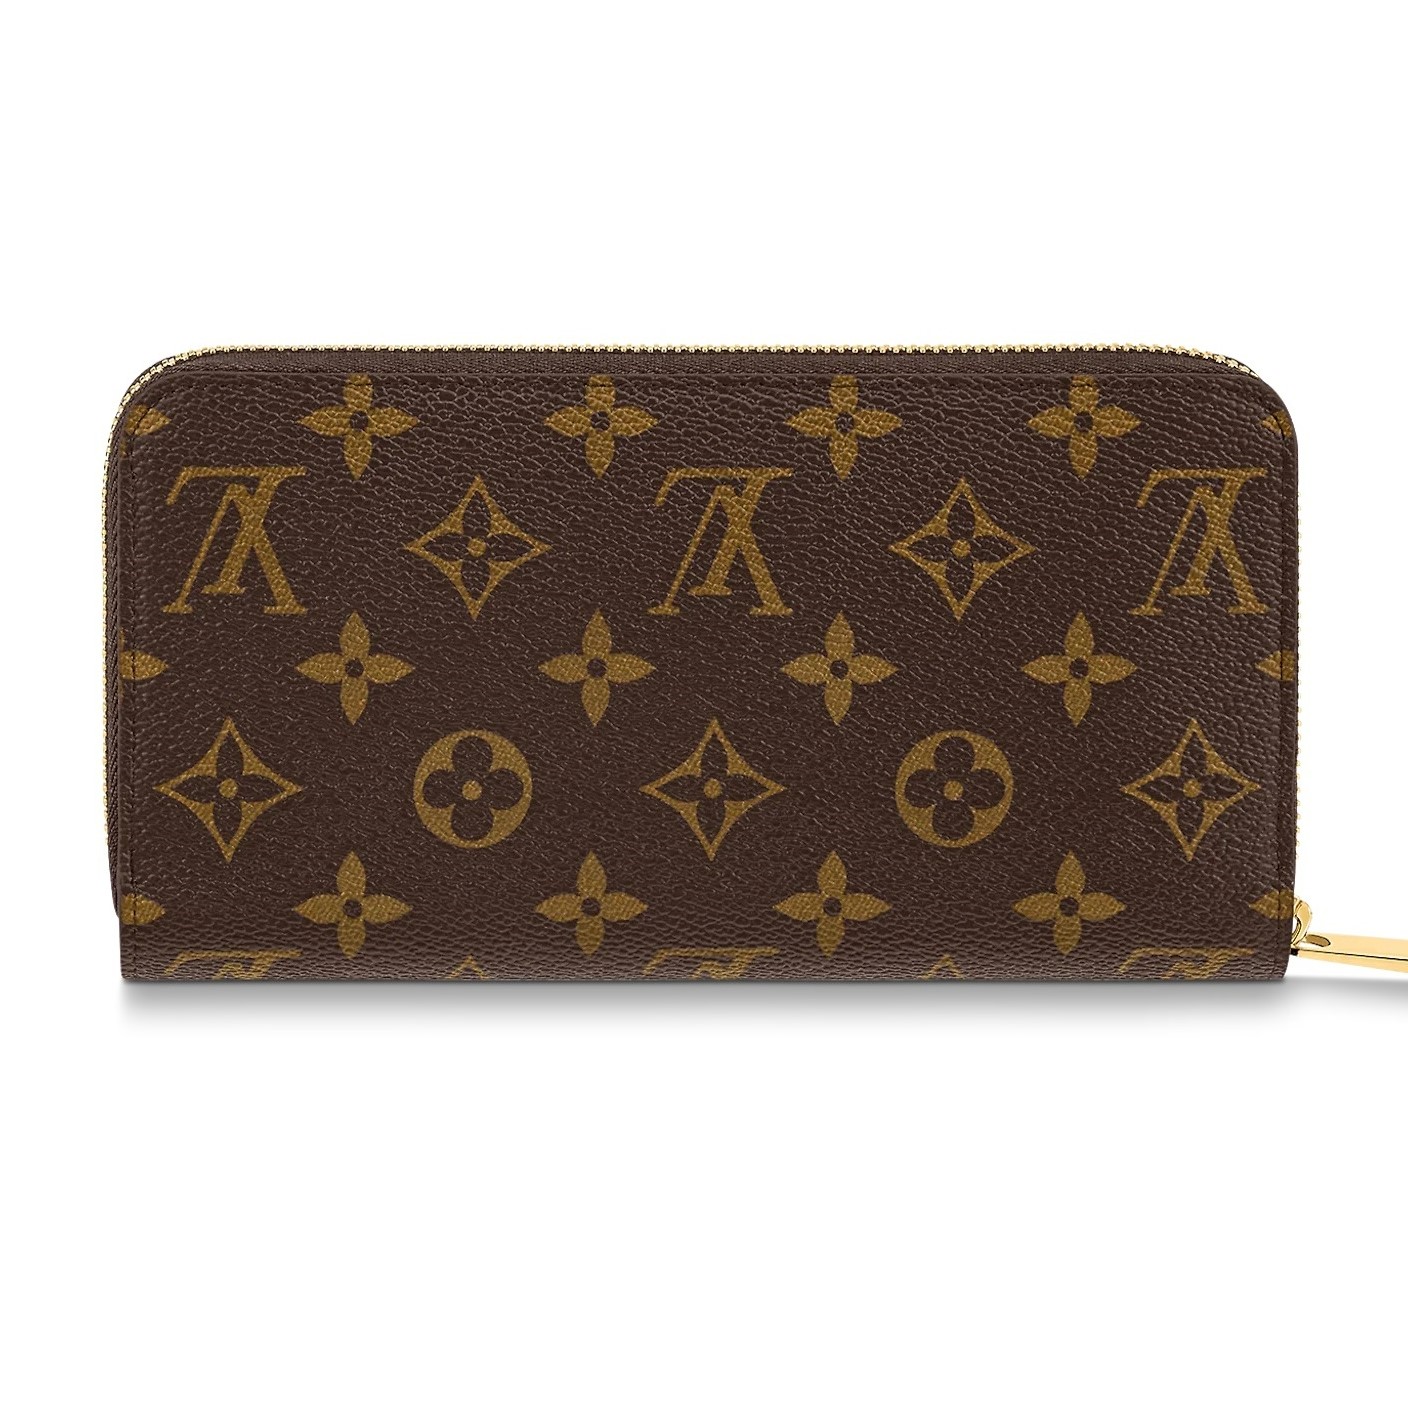 VÍ DÀI NỮ LV LOUIS VUITTON ZIPPY WALLET MONOGRAM CANVAS WALLETS AND SMALL LEATHER GOODS M81630 2